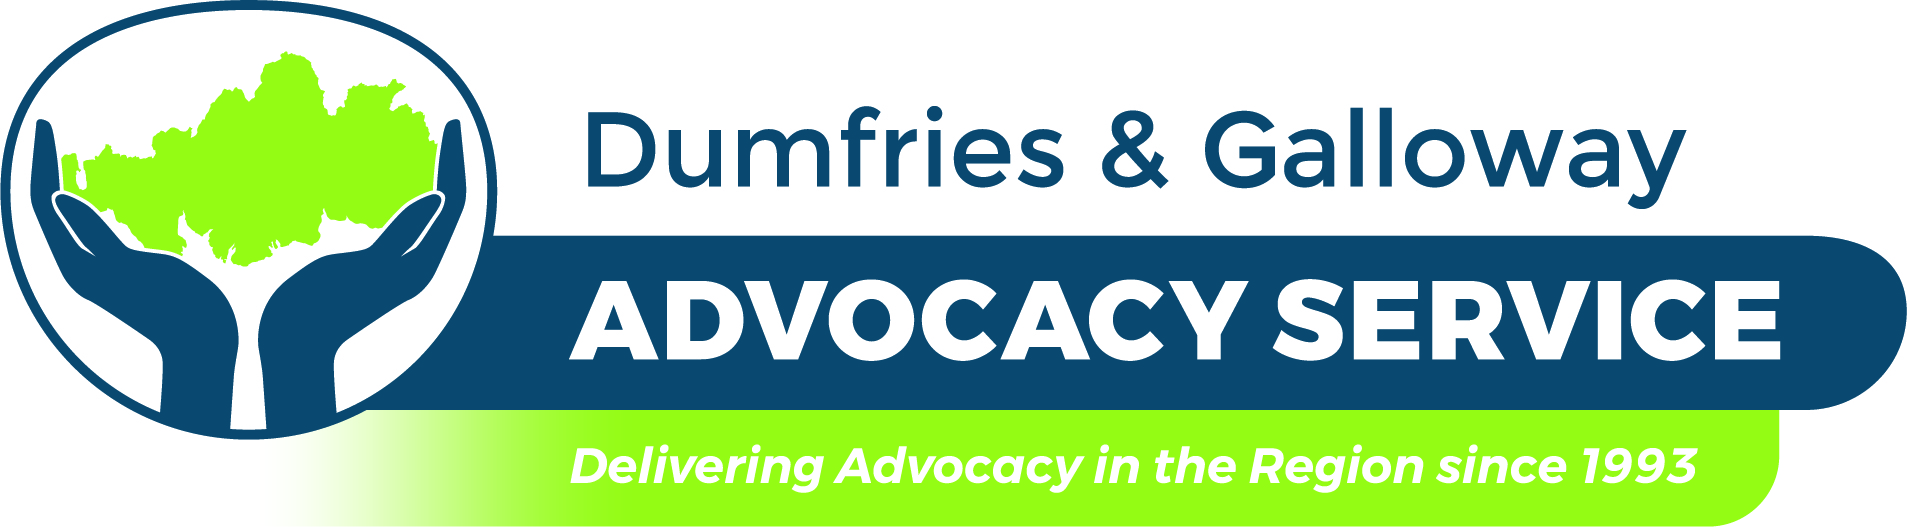 Dumfries and Galloway Advocacy Service Logo